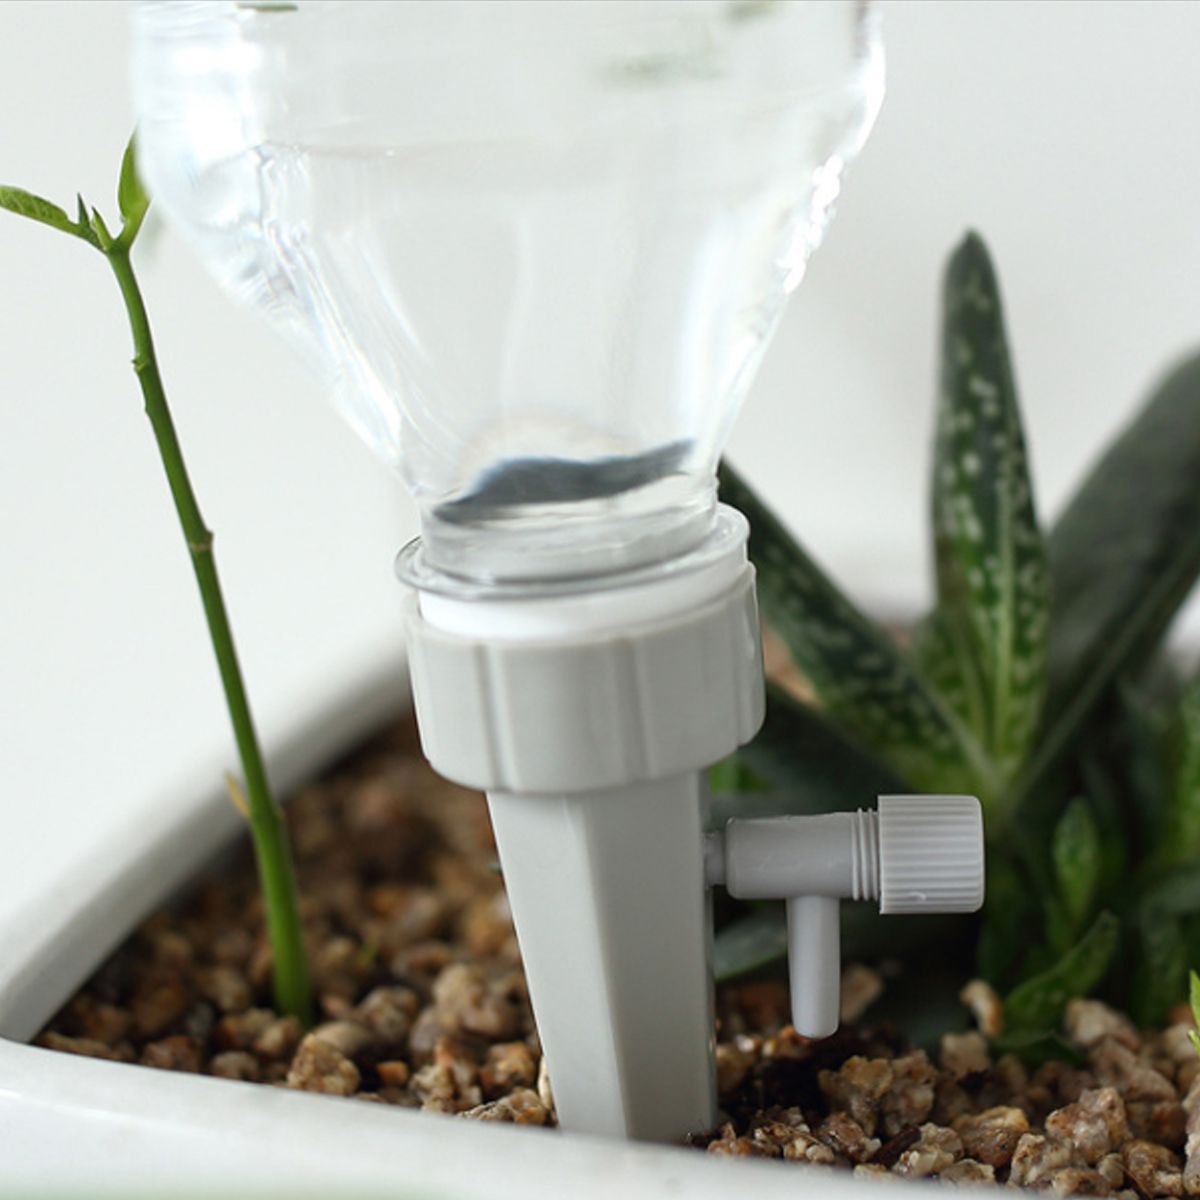 5Pcs-Plants-Self-Watering-Flowers-Device-Water-Spikes-Automatic-Water-Drip-Tools-1739216